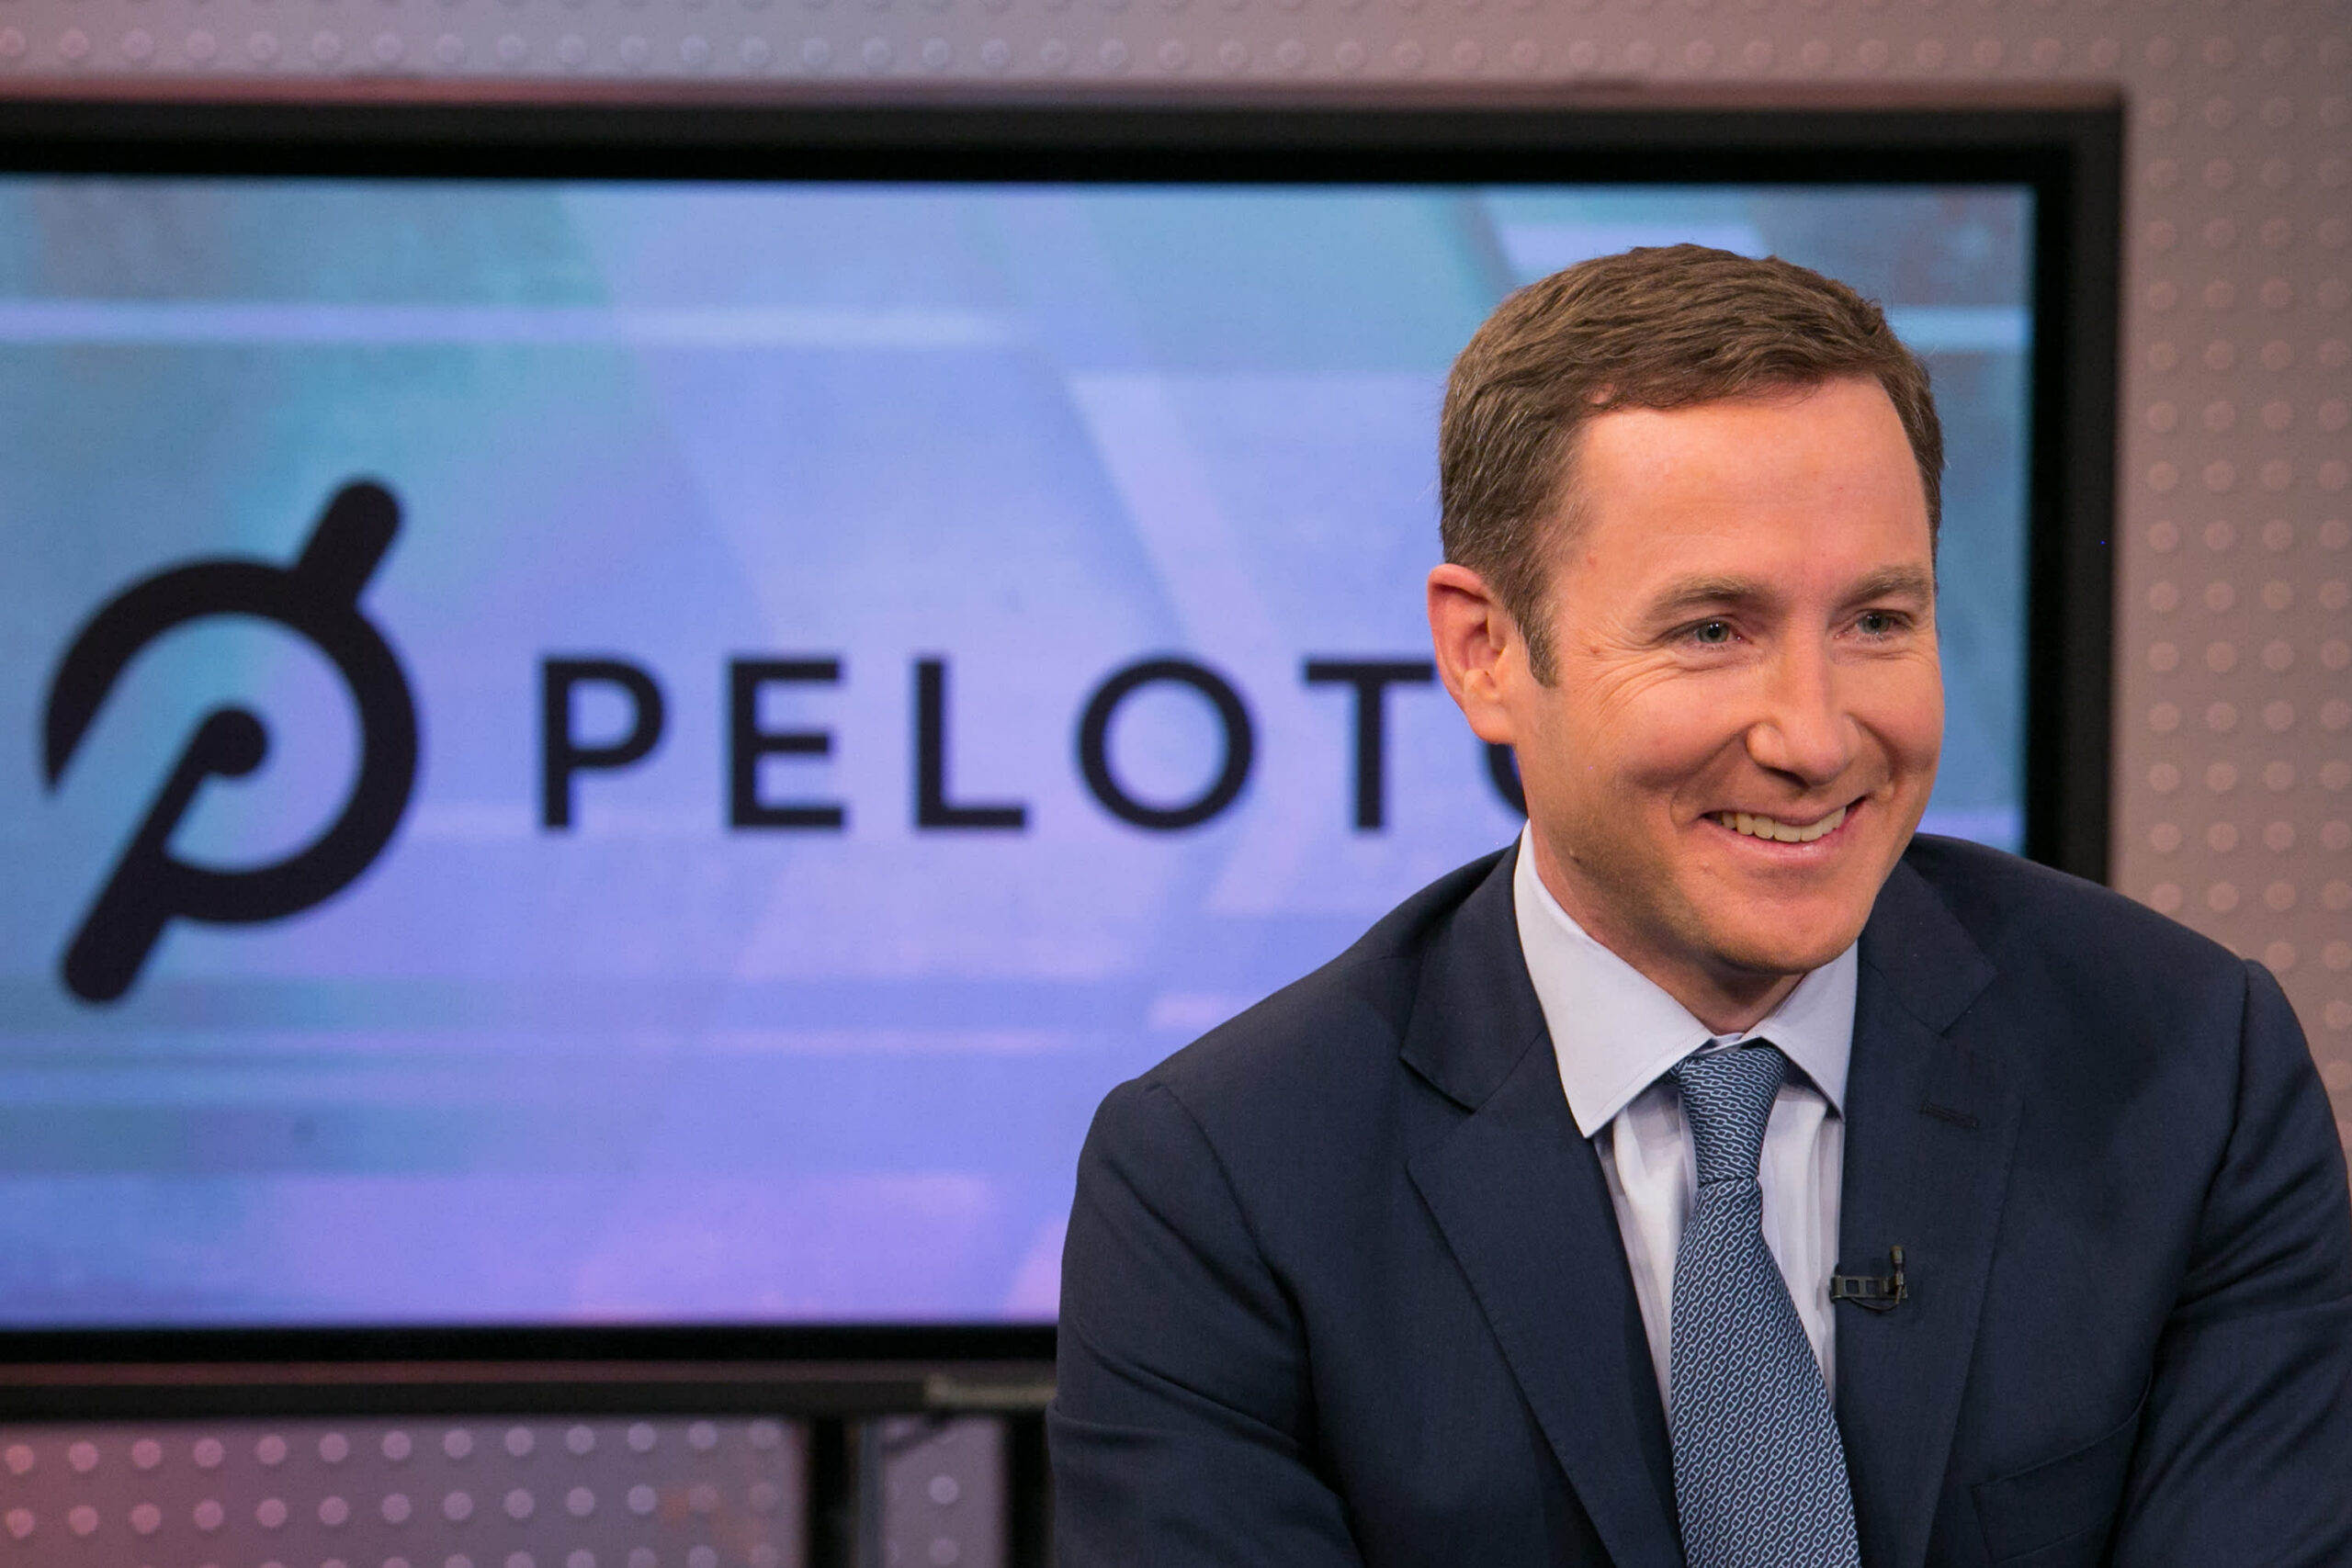 Peloton CEO John Foley to step down, transition to executive chair as company cuts 2,800 jobs, says report